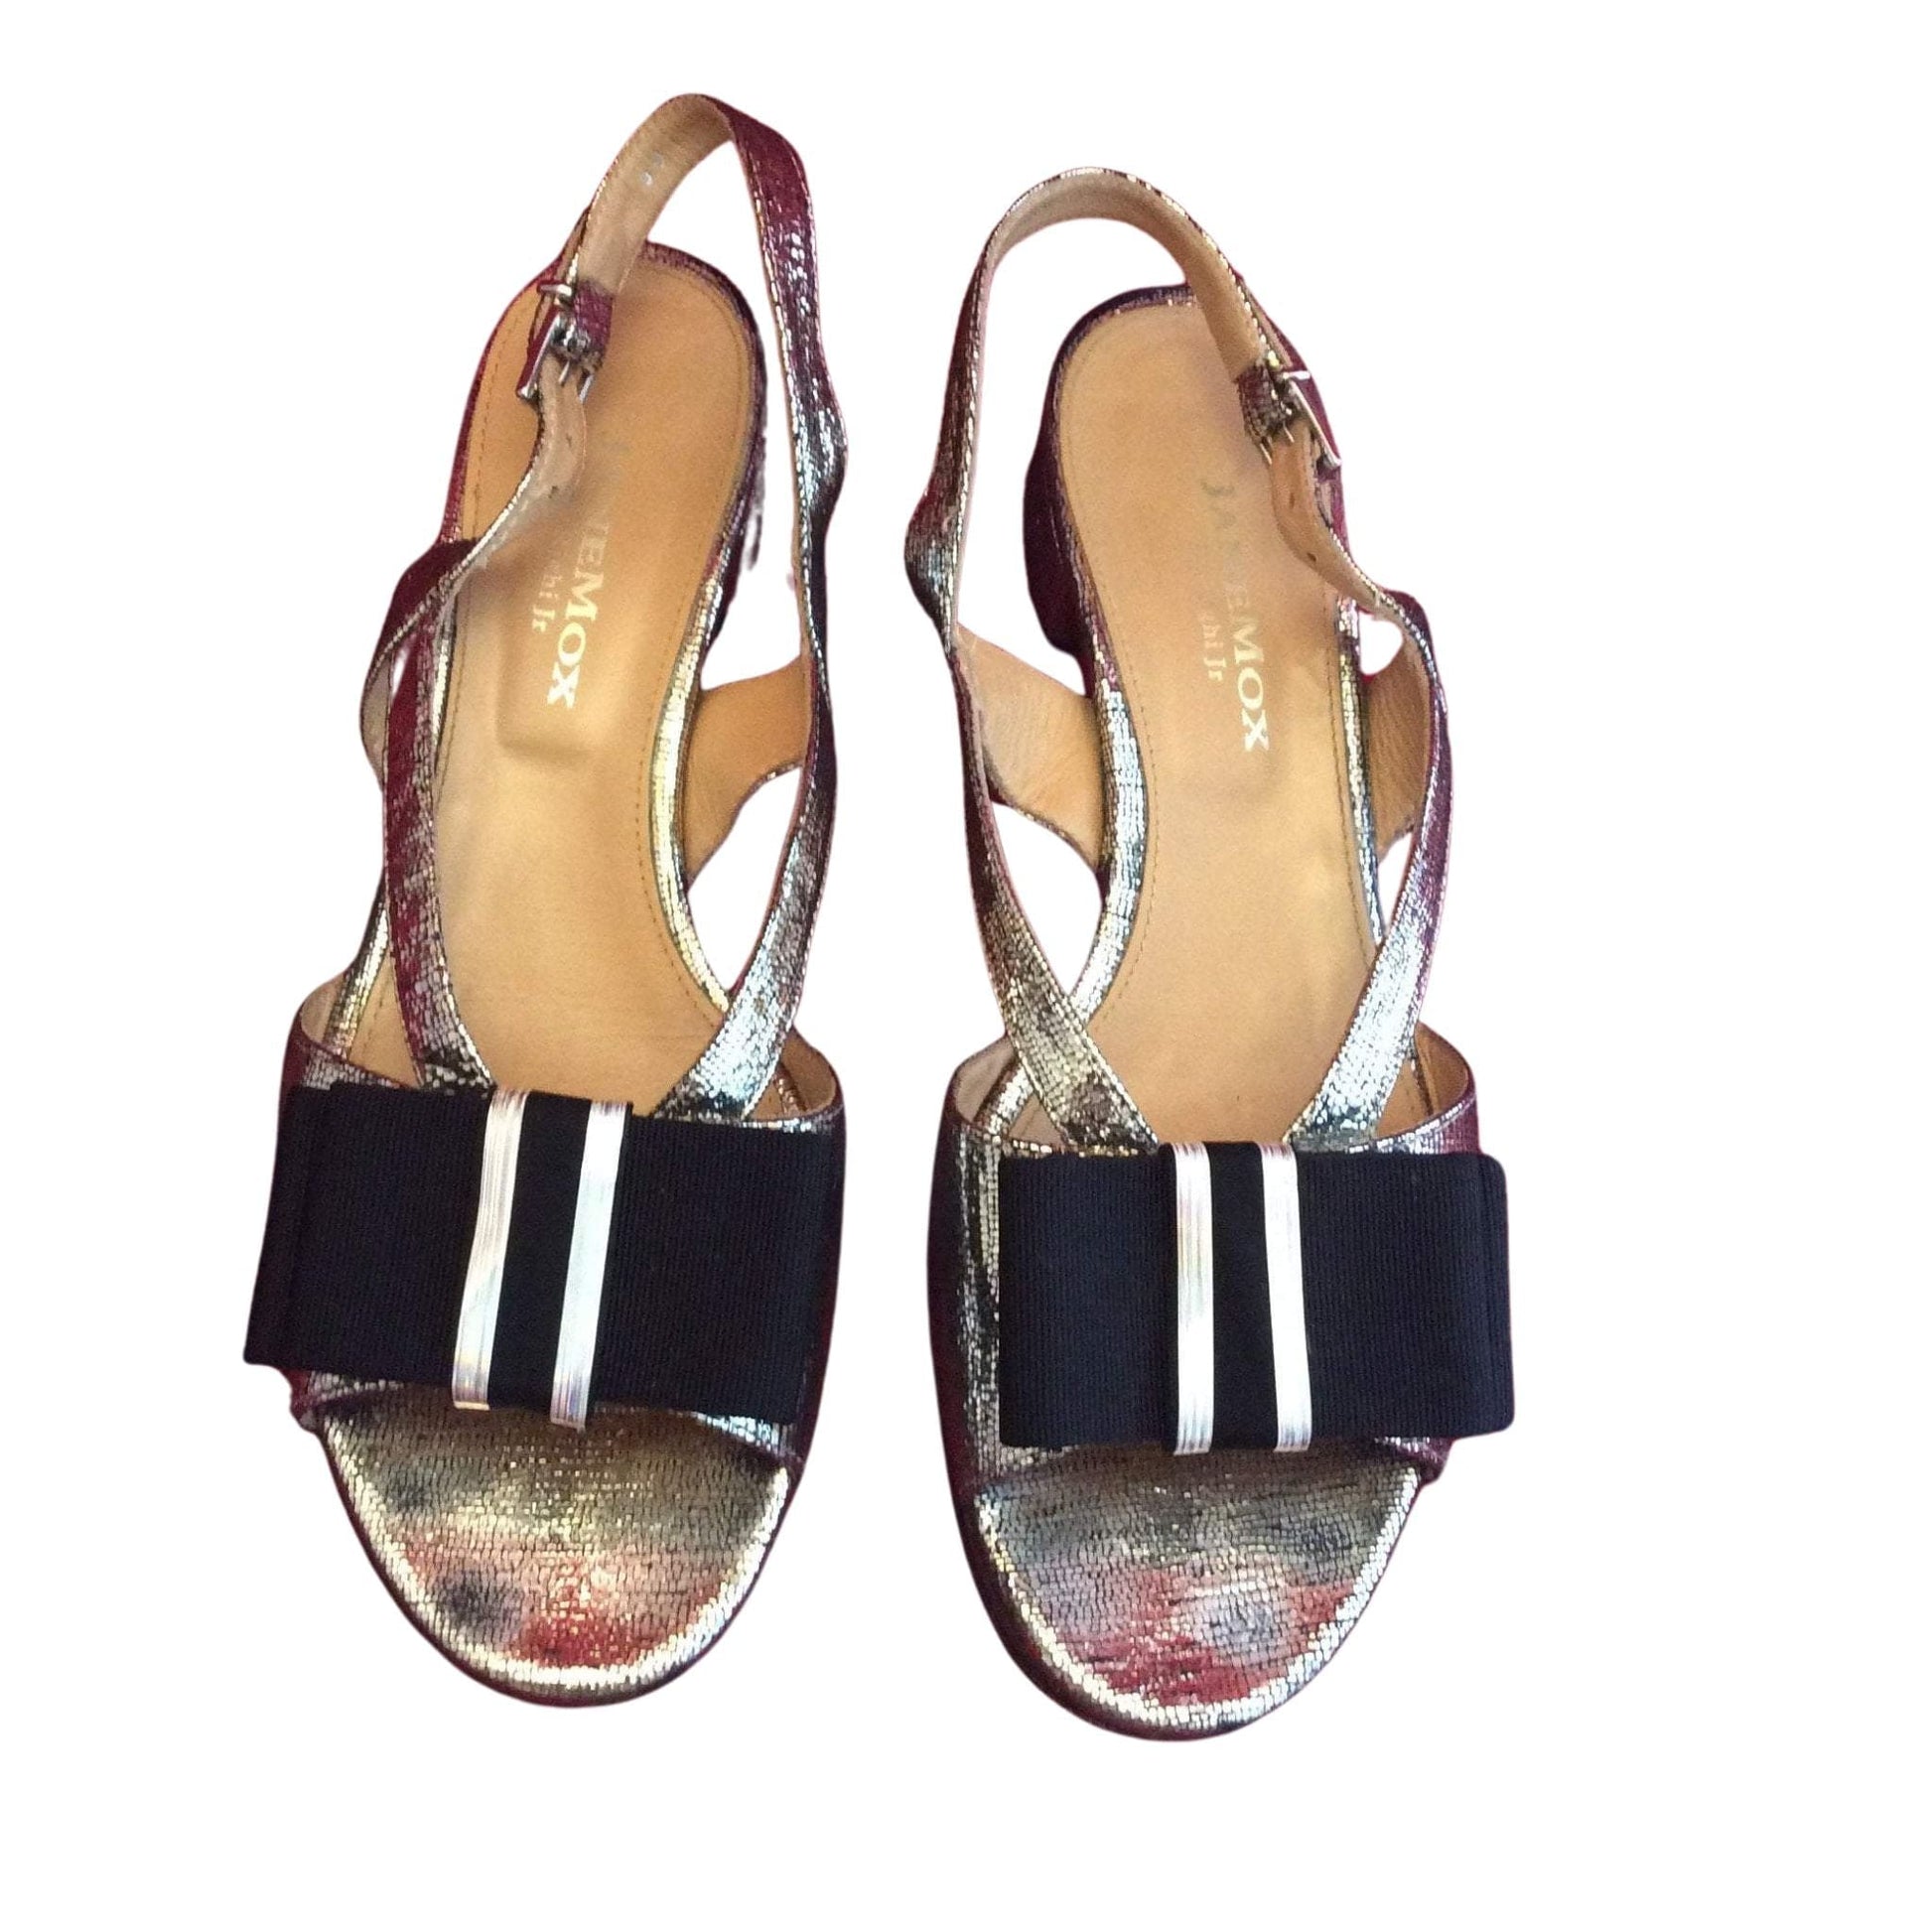 Jane Mox by Righi Sandals 8.5 / Silver / Vintage 1990s